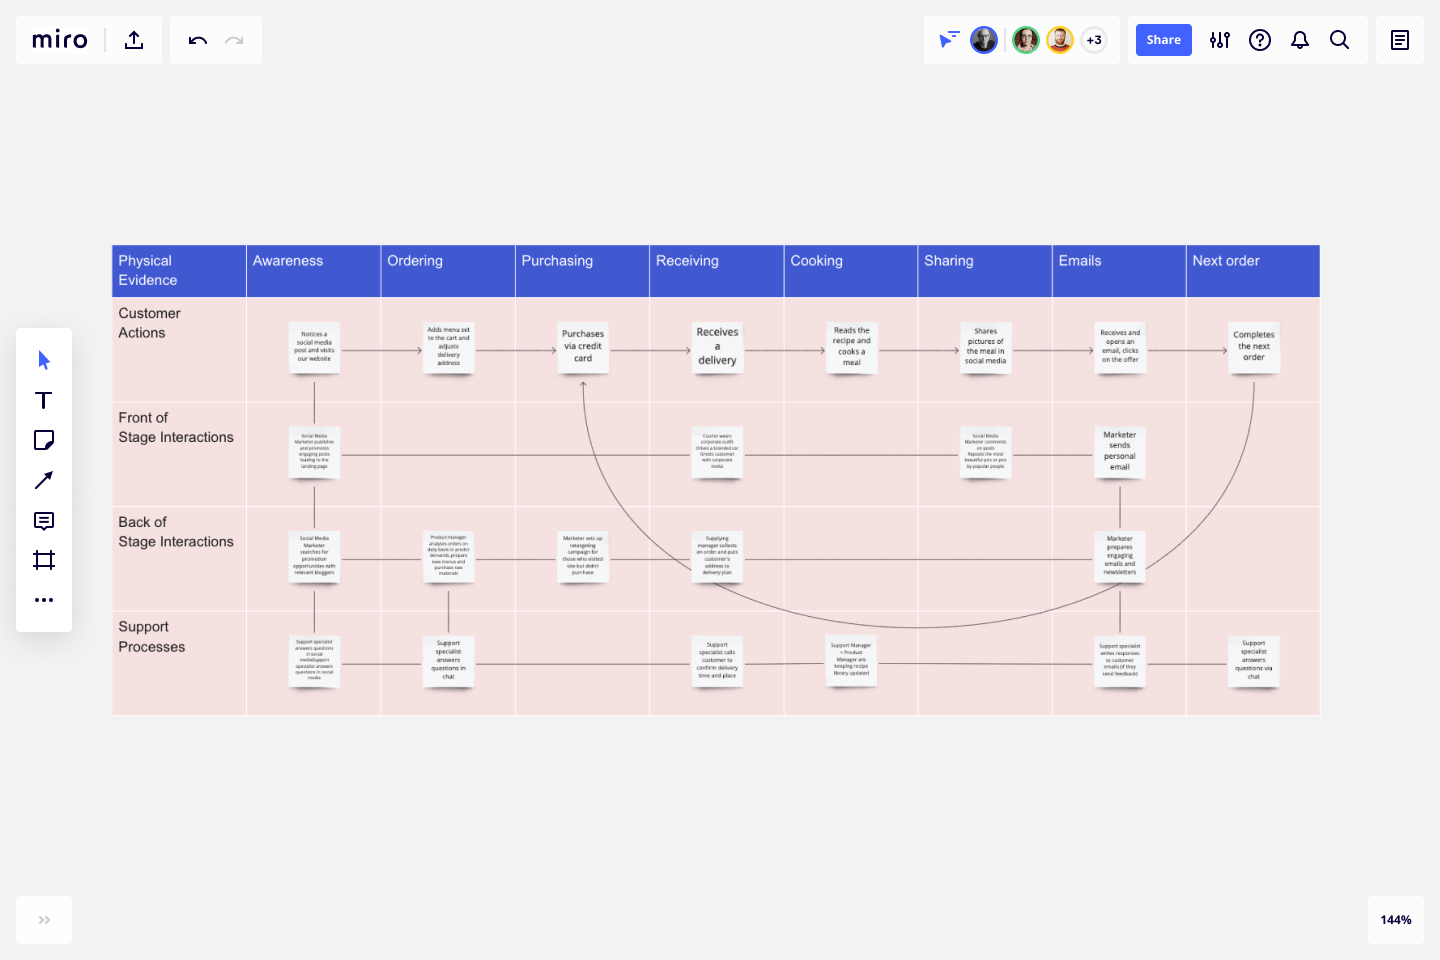 service blueprint template free download